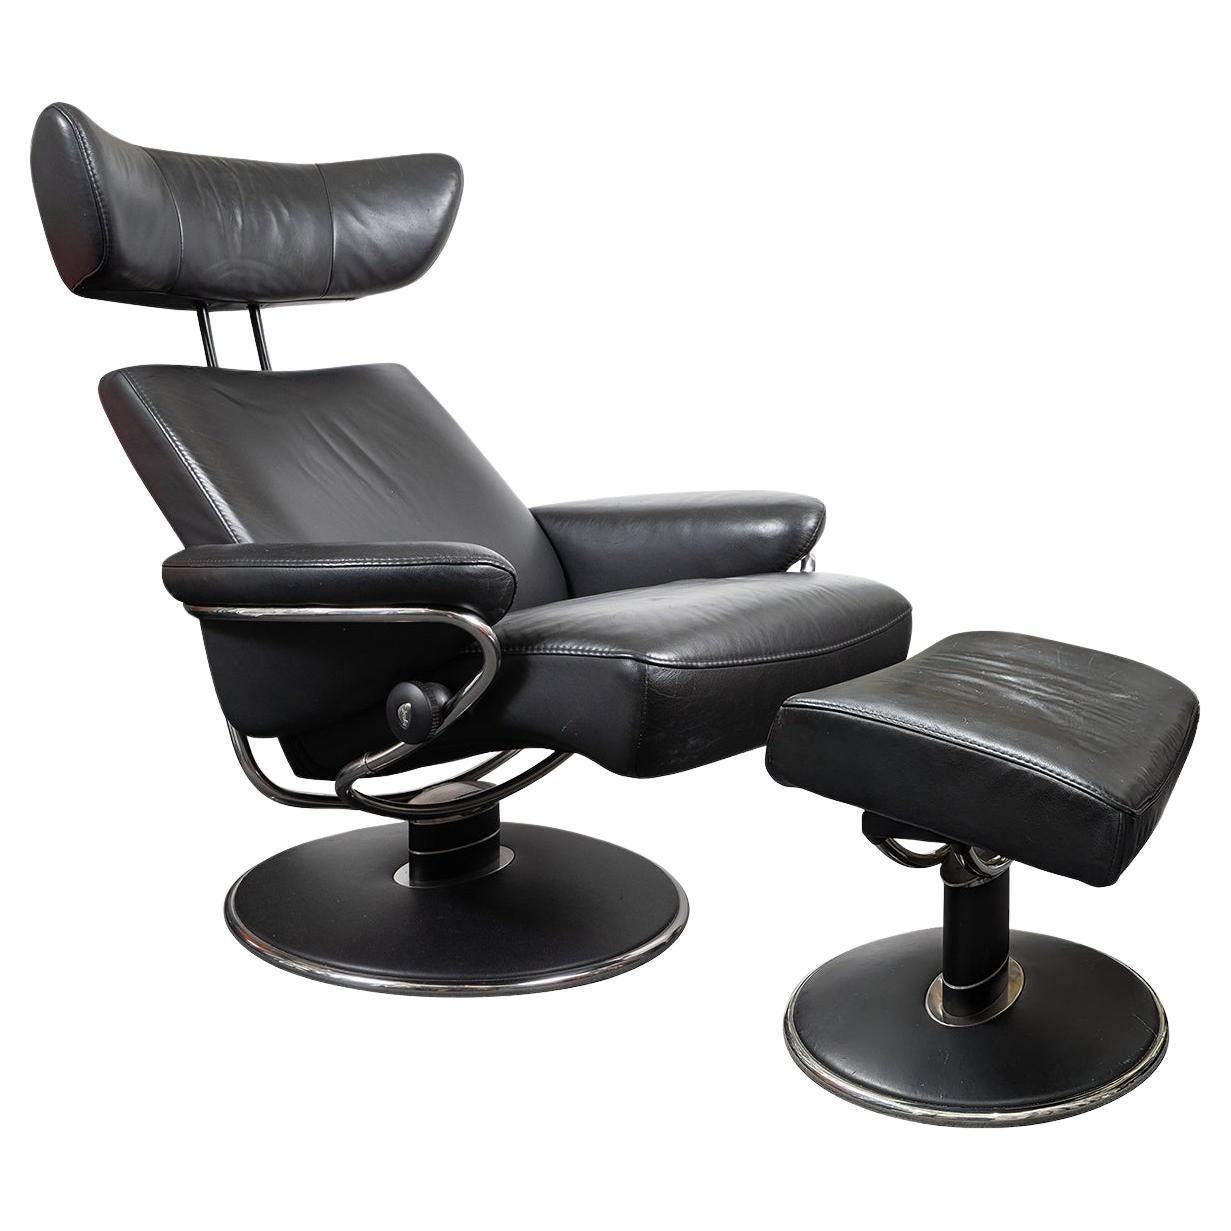 "Jazz" adjustable leather recliner and ottoman set by Ekornes For Sale